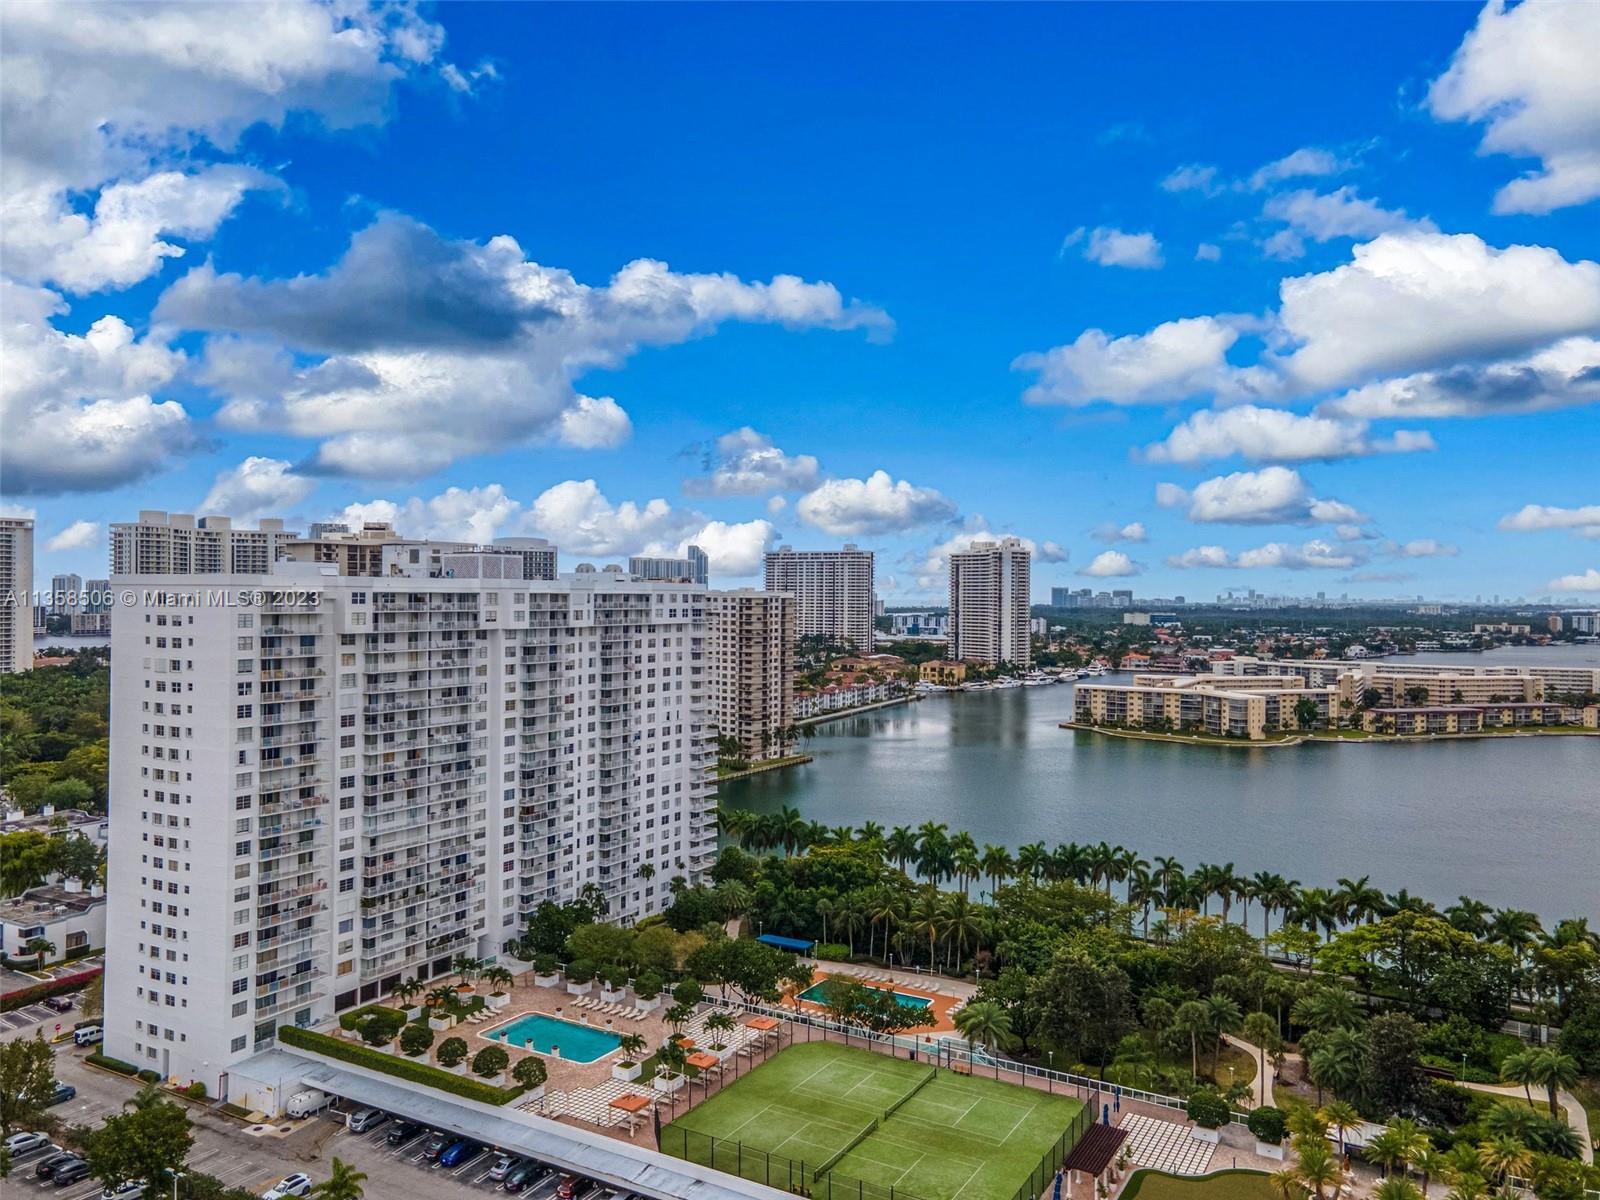 Renovated 2 bedrooms 2 bath condo in one of the best residential areas in Aventura.  East-facing uni